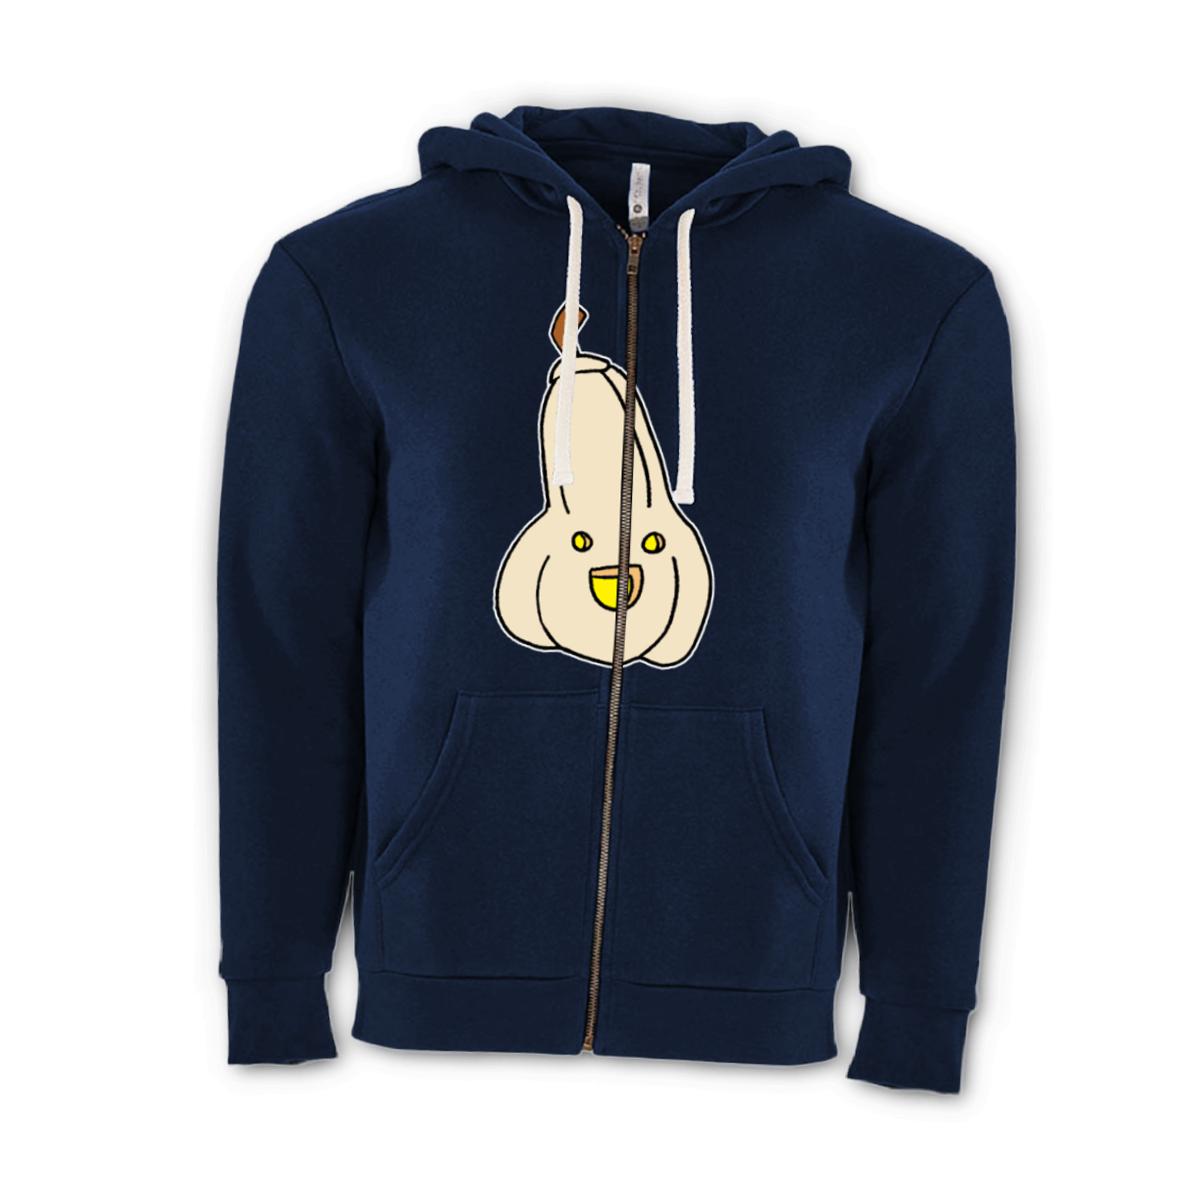 The New Guy Unisex Zip Hoodie Double Extra Large midnight-navy